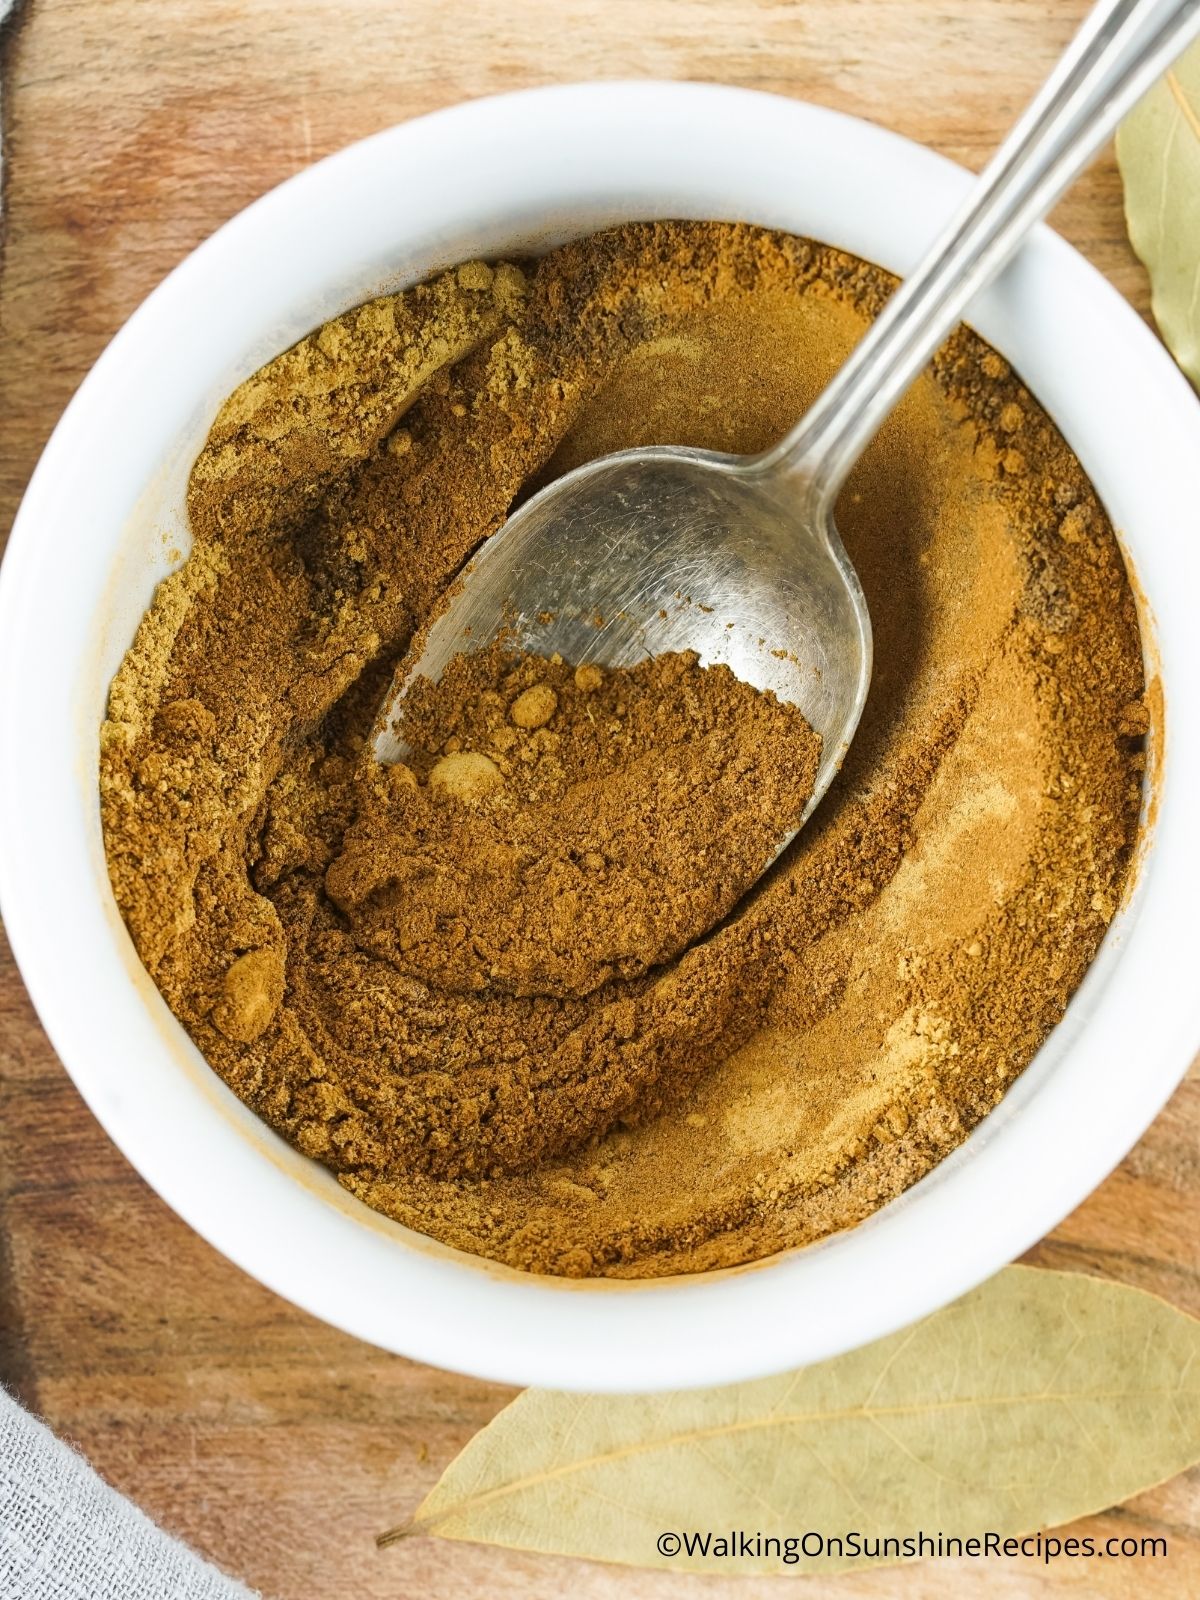 Use a spoon to combine the spices.